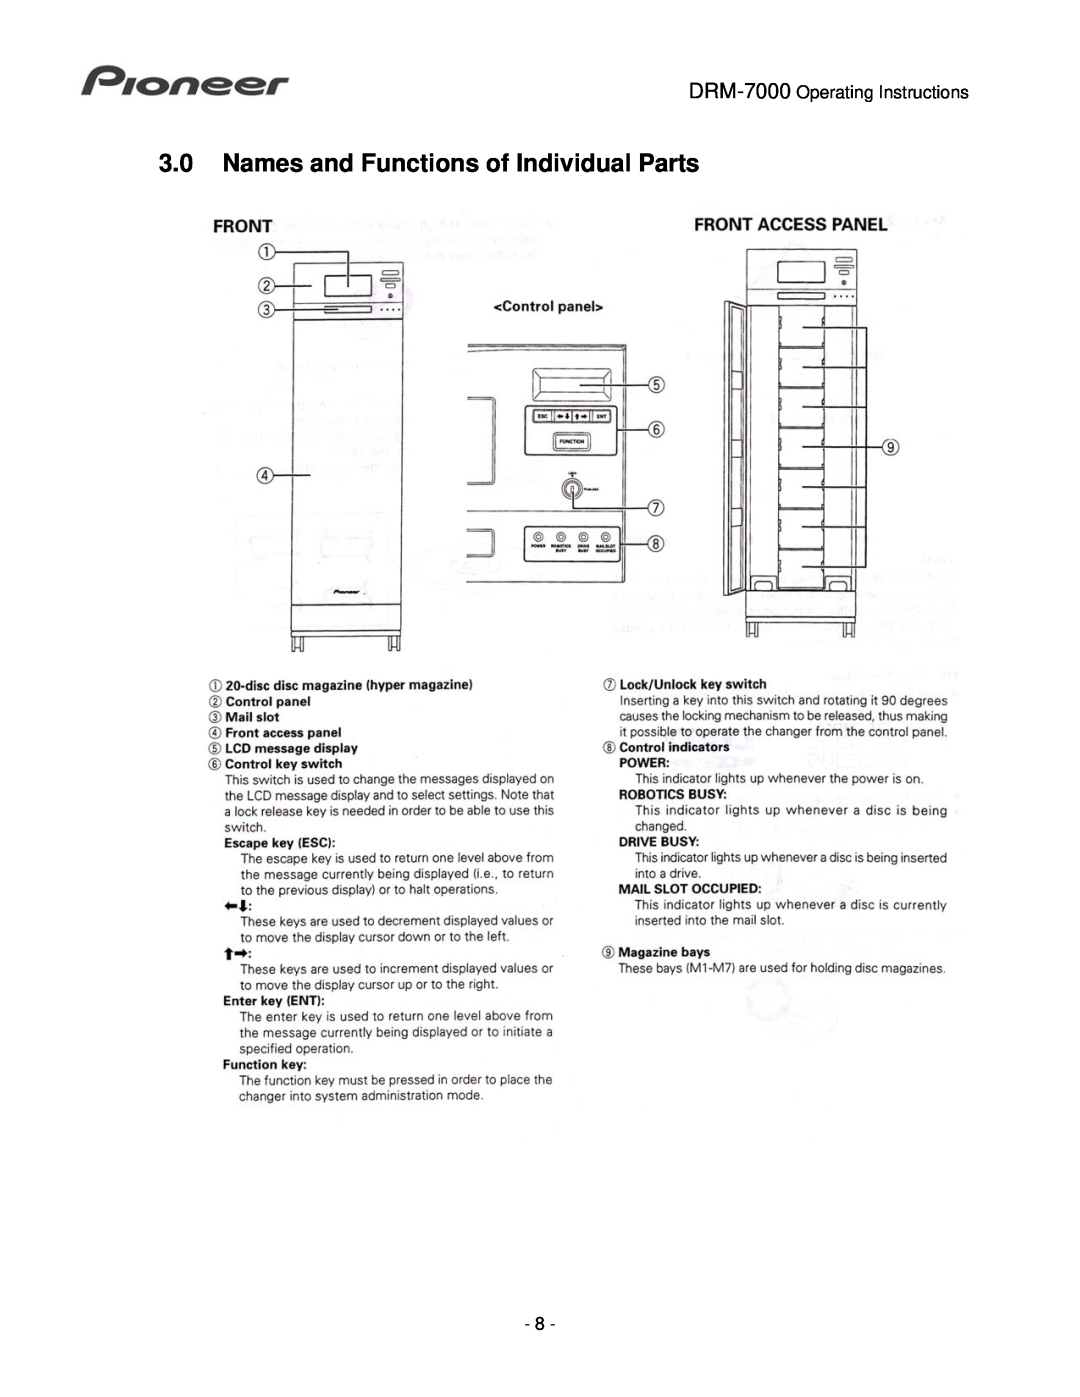 Pioneer operating instructions 3.0Names and Functions of Individual Parts, DRM-7000 Operating Instructions 